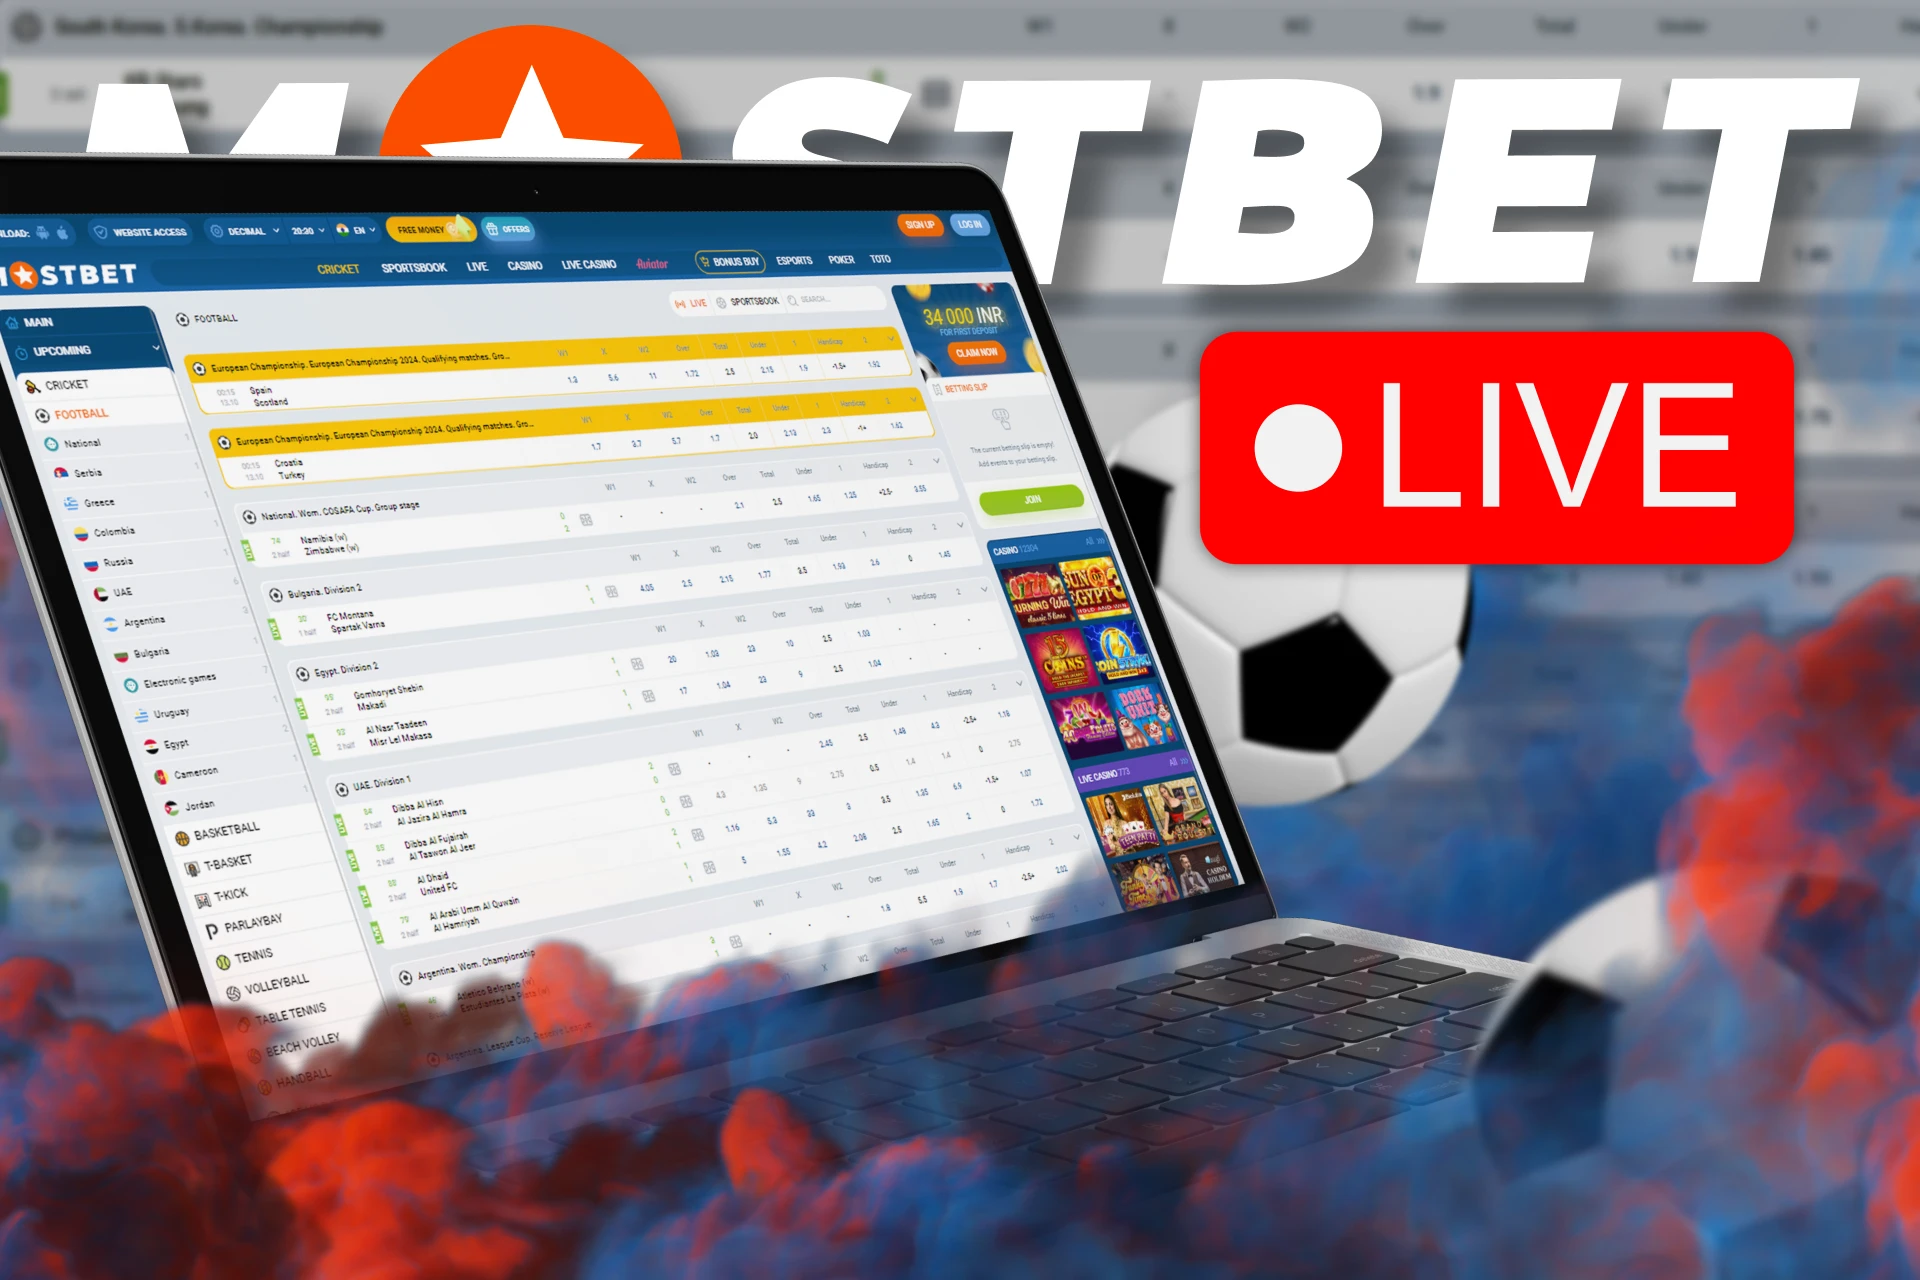 At Mostbet, watch football streaming and place bets at the same time.